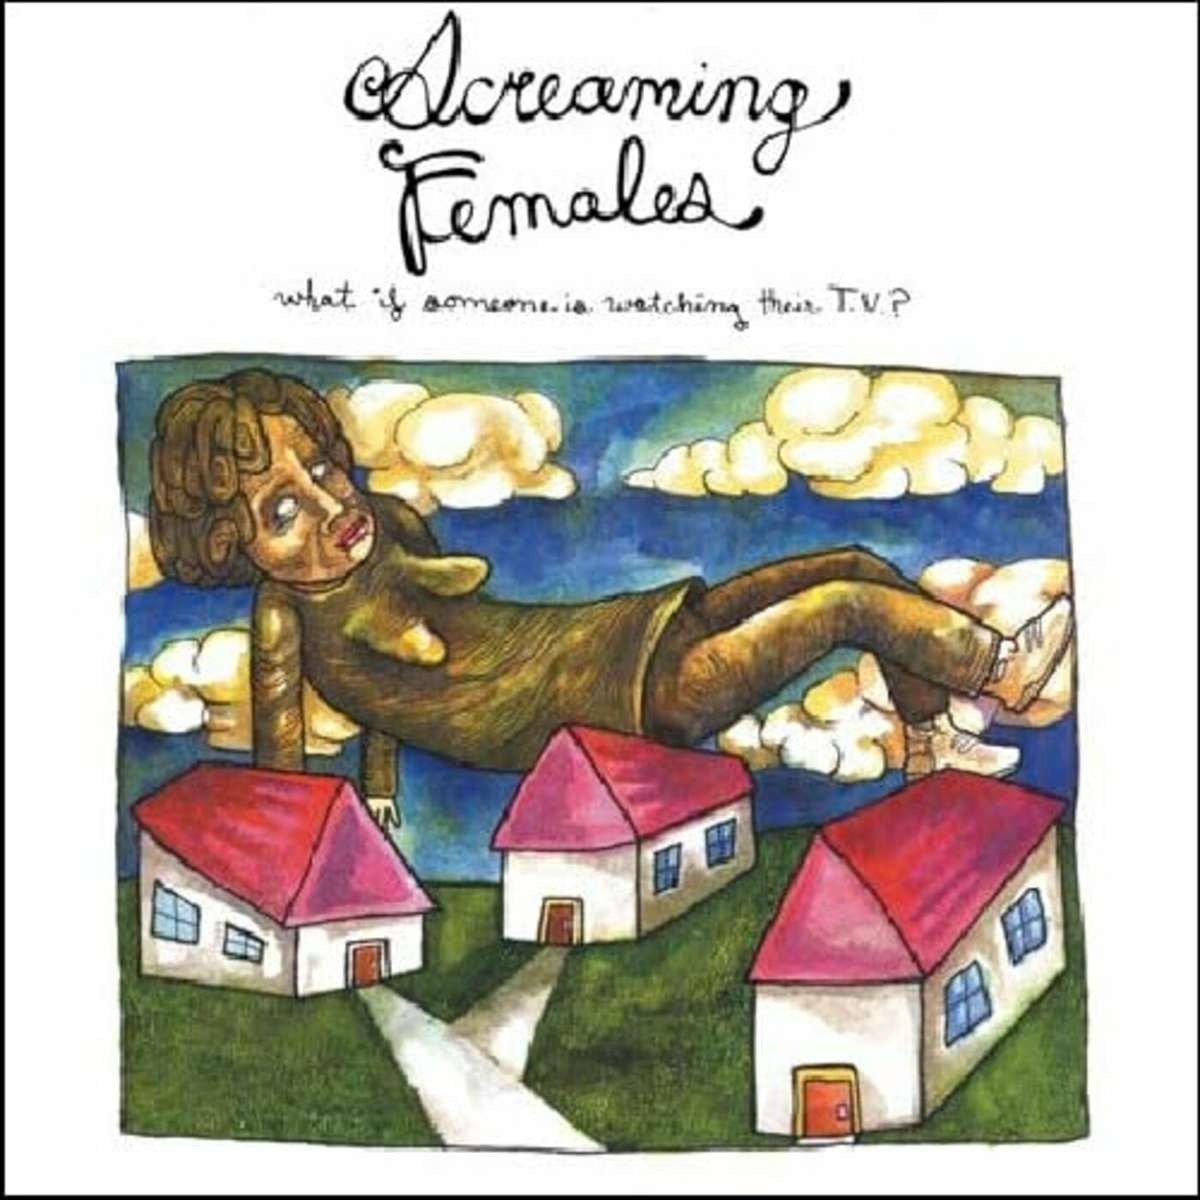 CD Shop - SCREAMING FEMALES WHAT IF SOMEONE IS WATCHING THEIR TV?